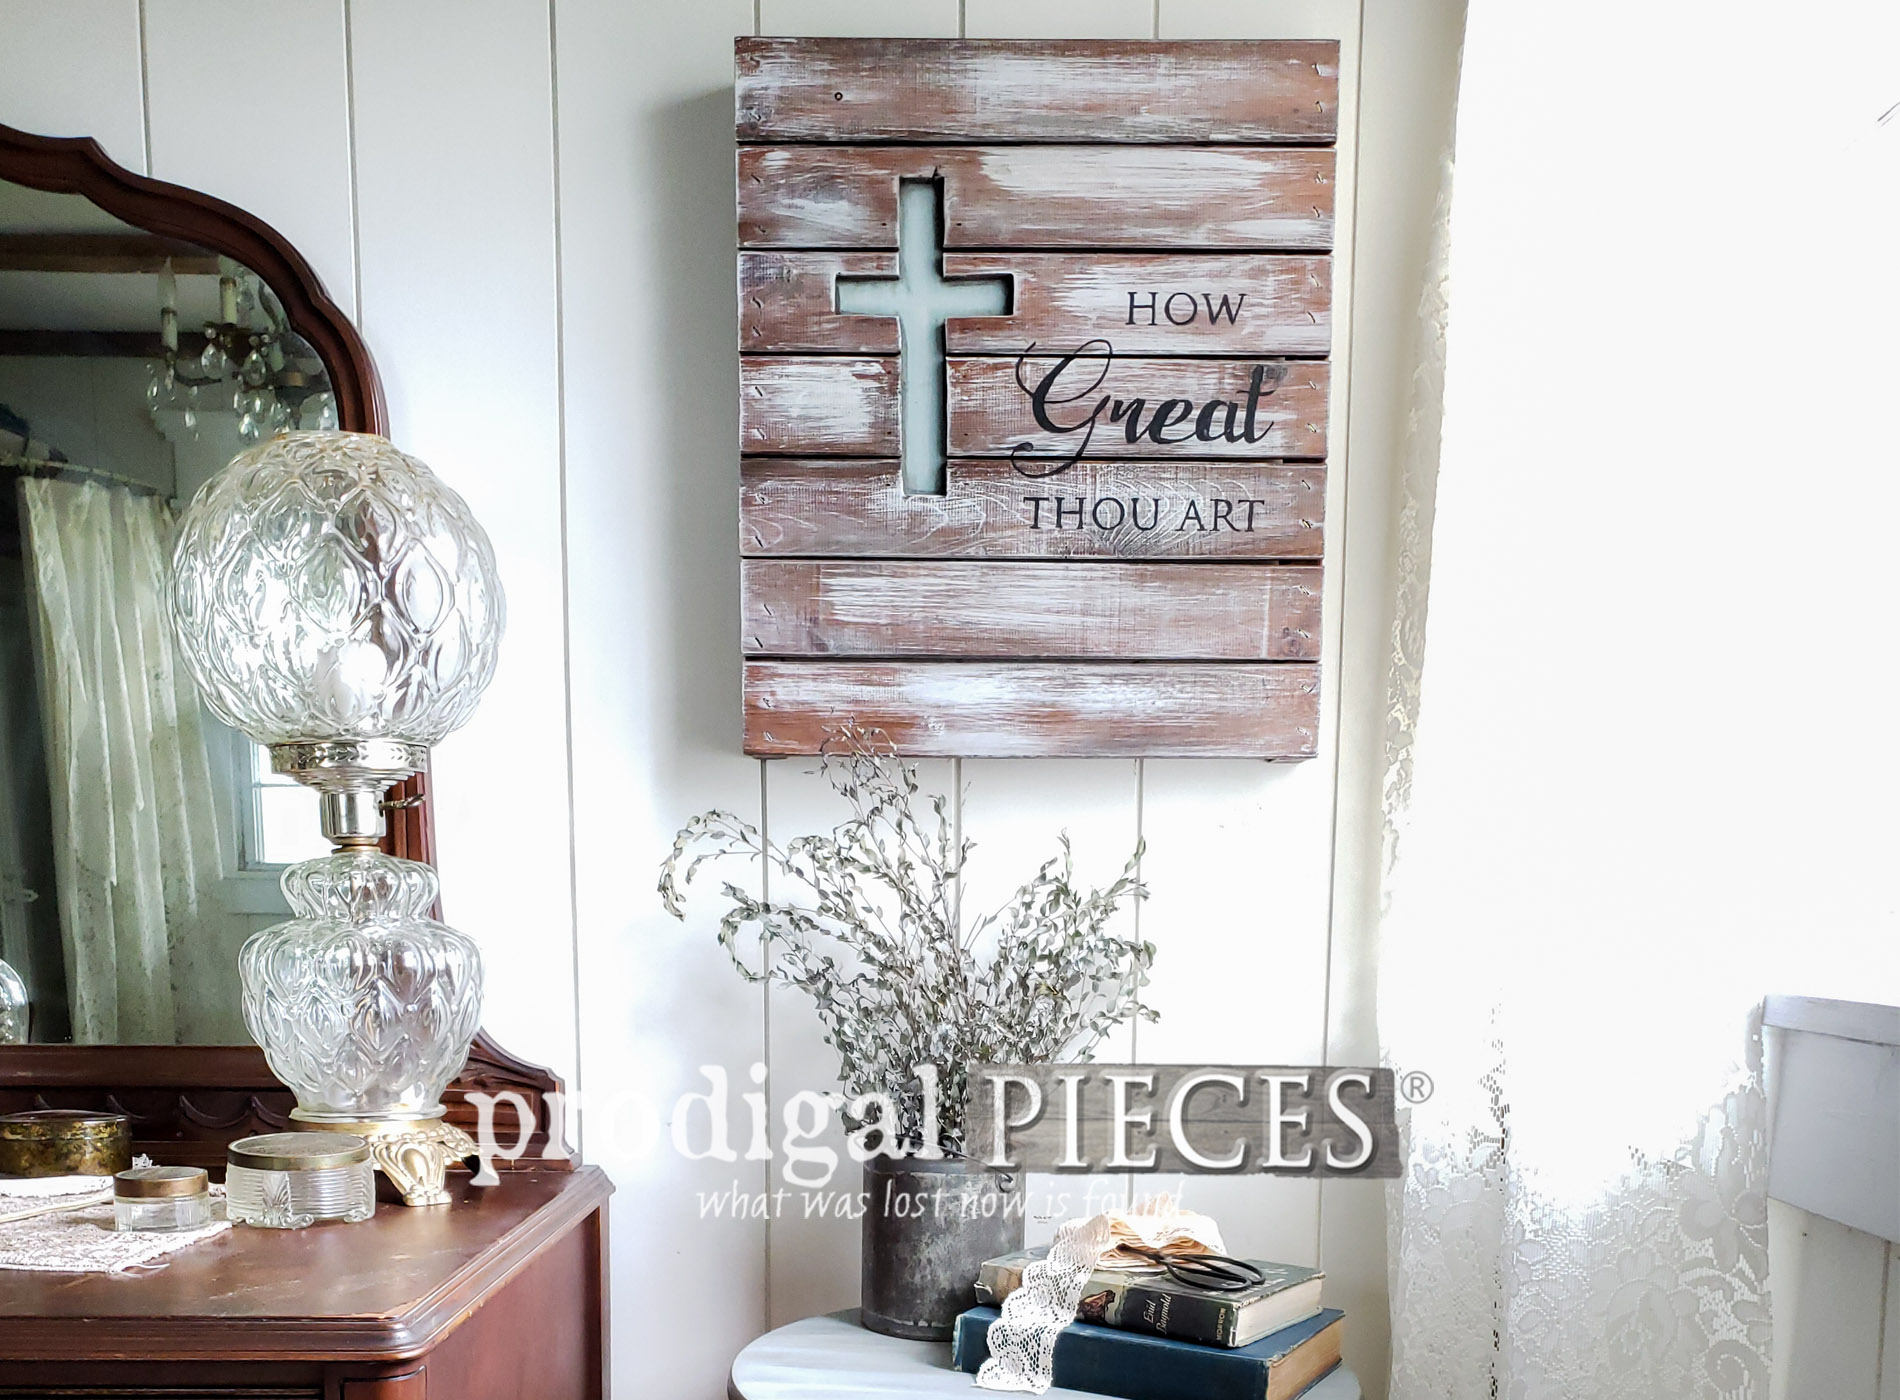 Featured Upcycled Farmhouse Decor by Larissa of Prodigal Pieces | prodigalpieces.com